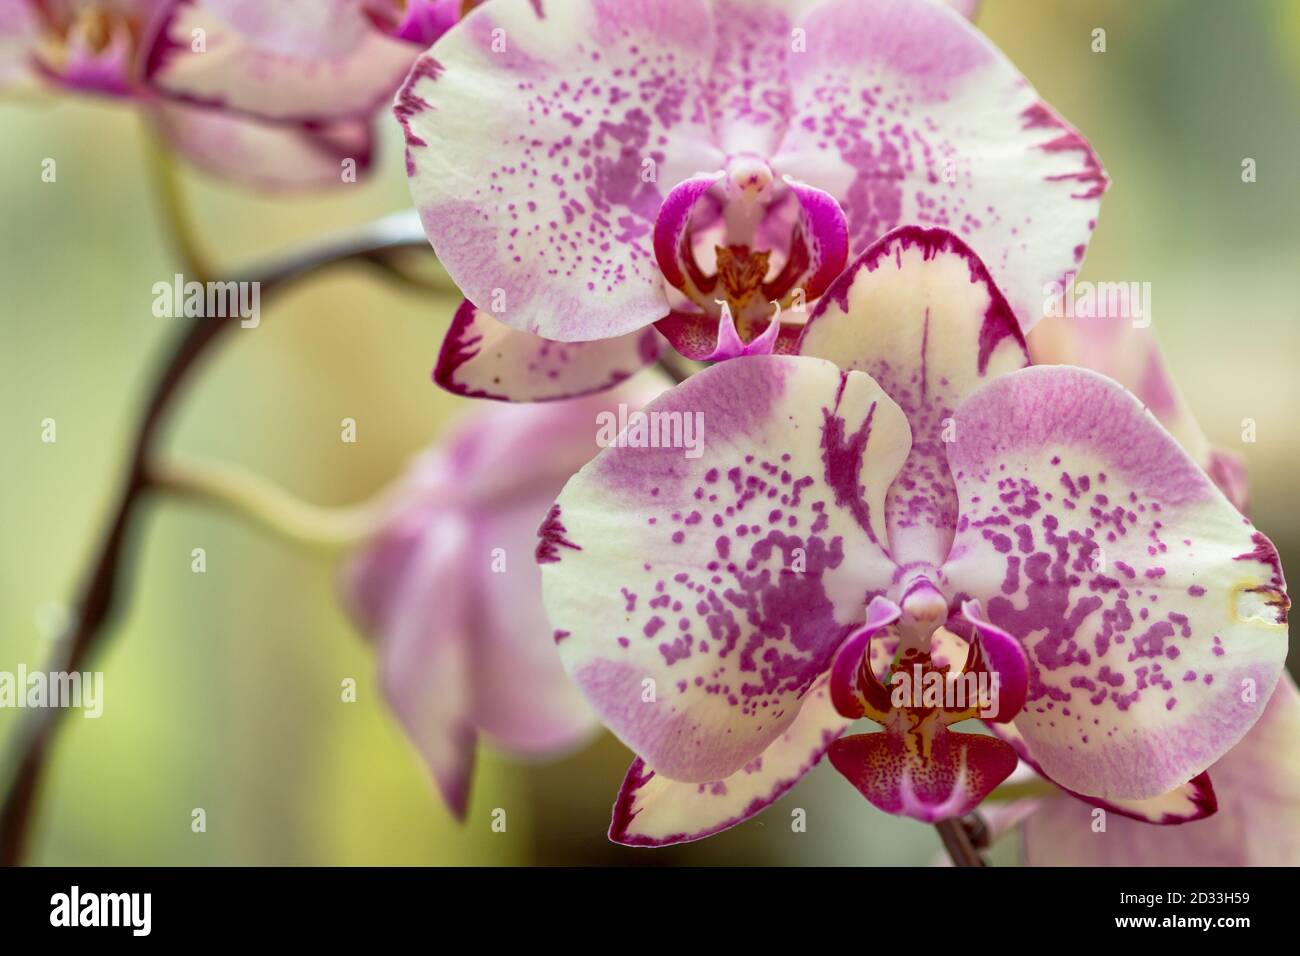 Pink Spotted Phalaenopsis Orchid Stock Photo